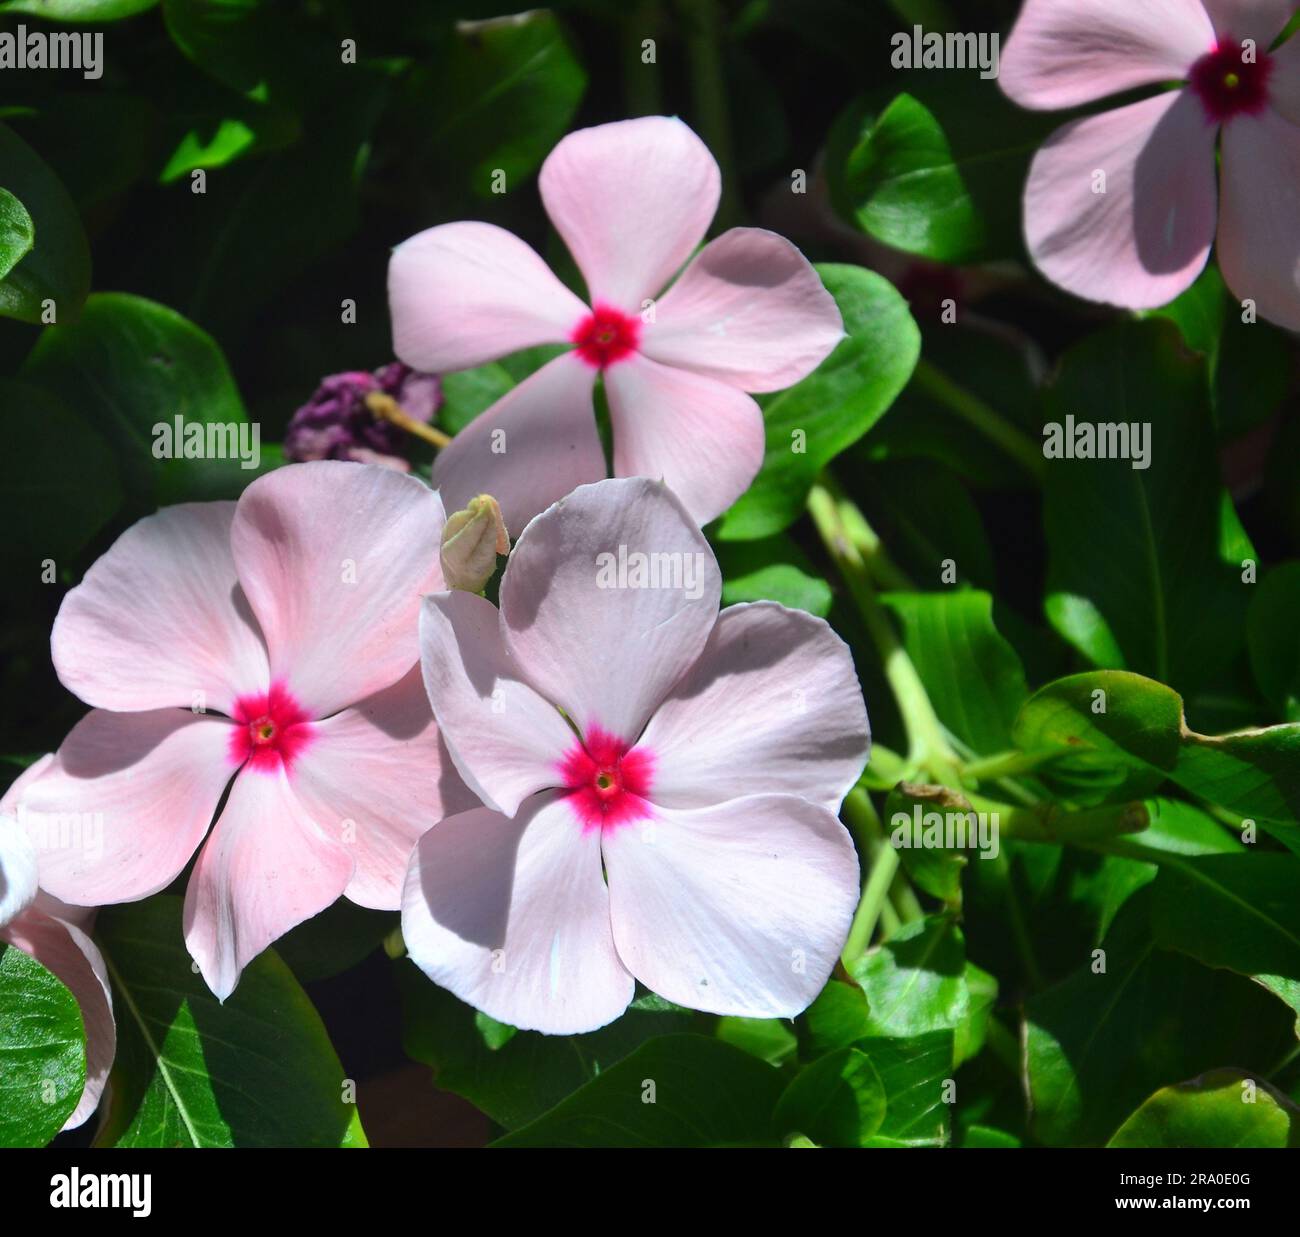 Madagascar Periwinkle flower in Thailand, Catharanthus roseus,  bright eyes, Cape periwinkle, graveyard plant, old maid, pink periwinkle. Stock Photo